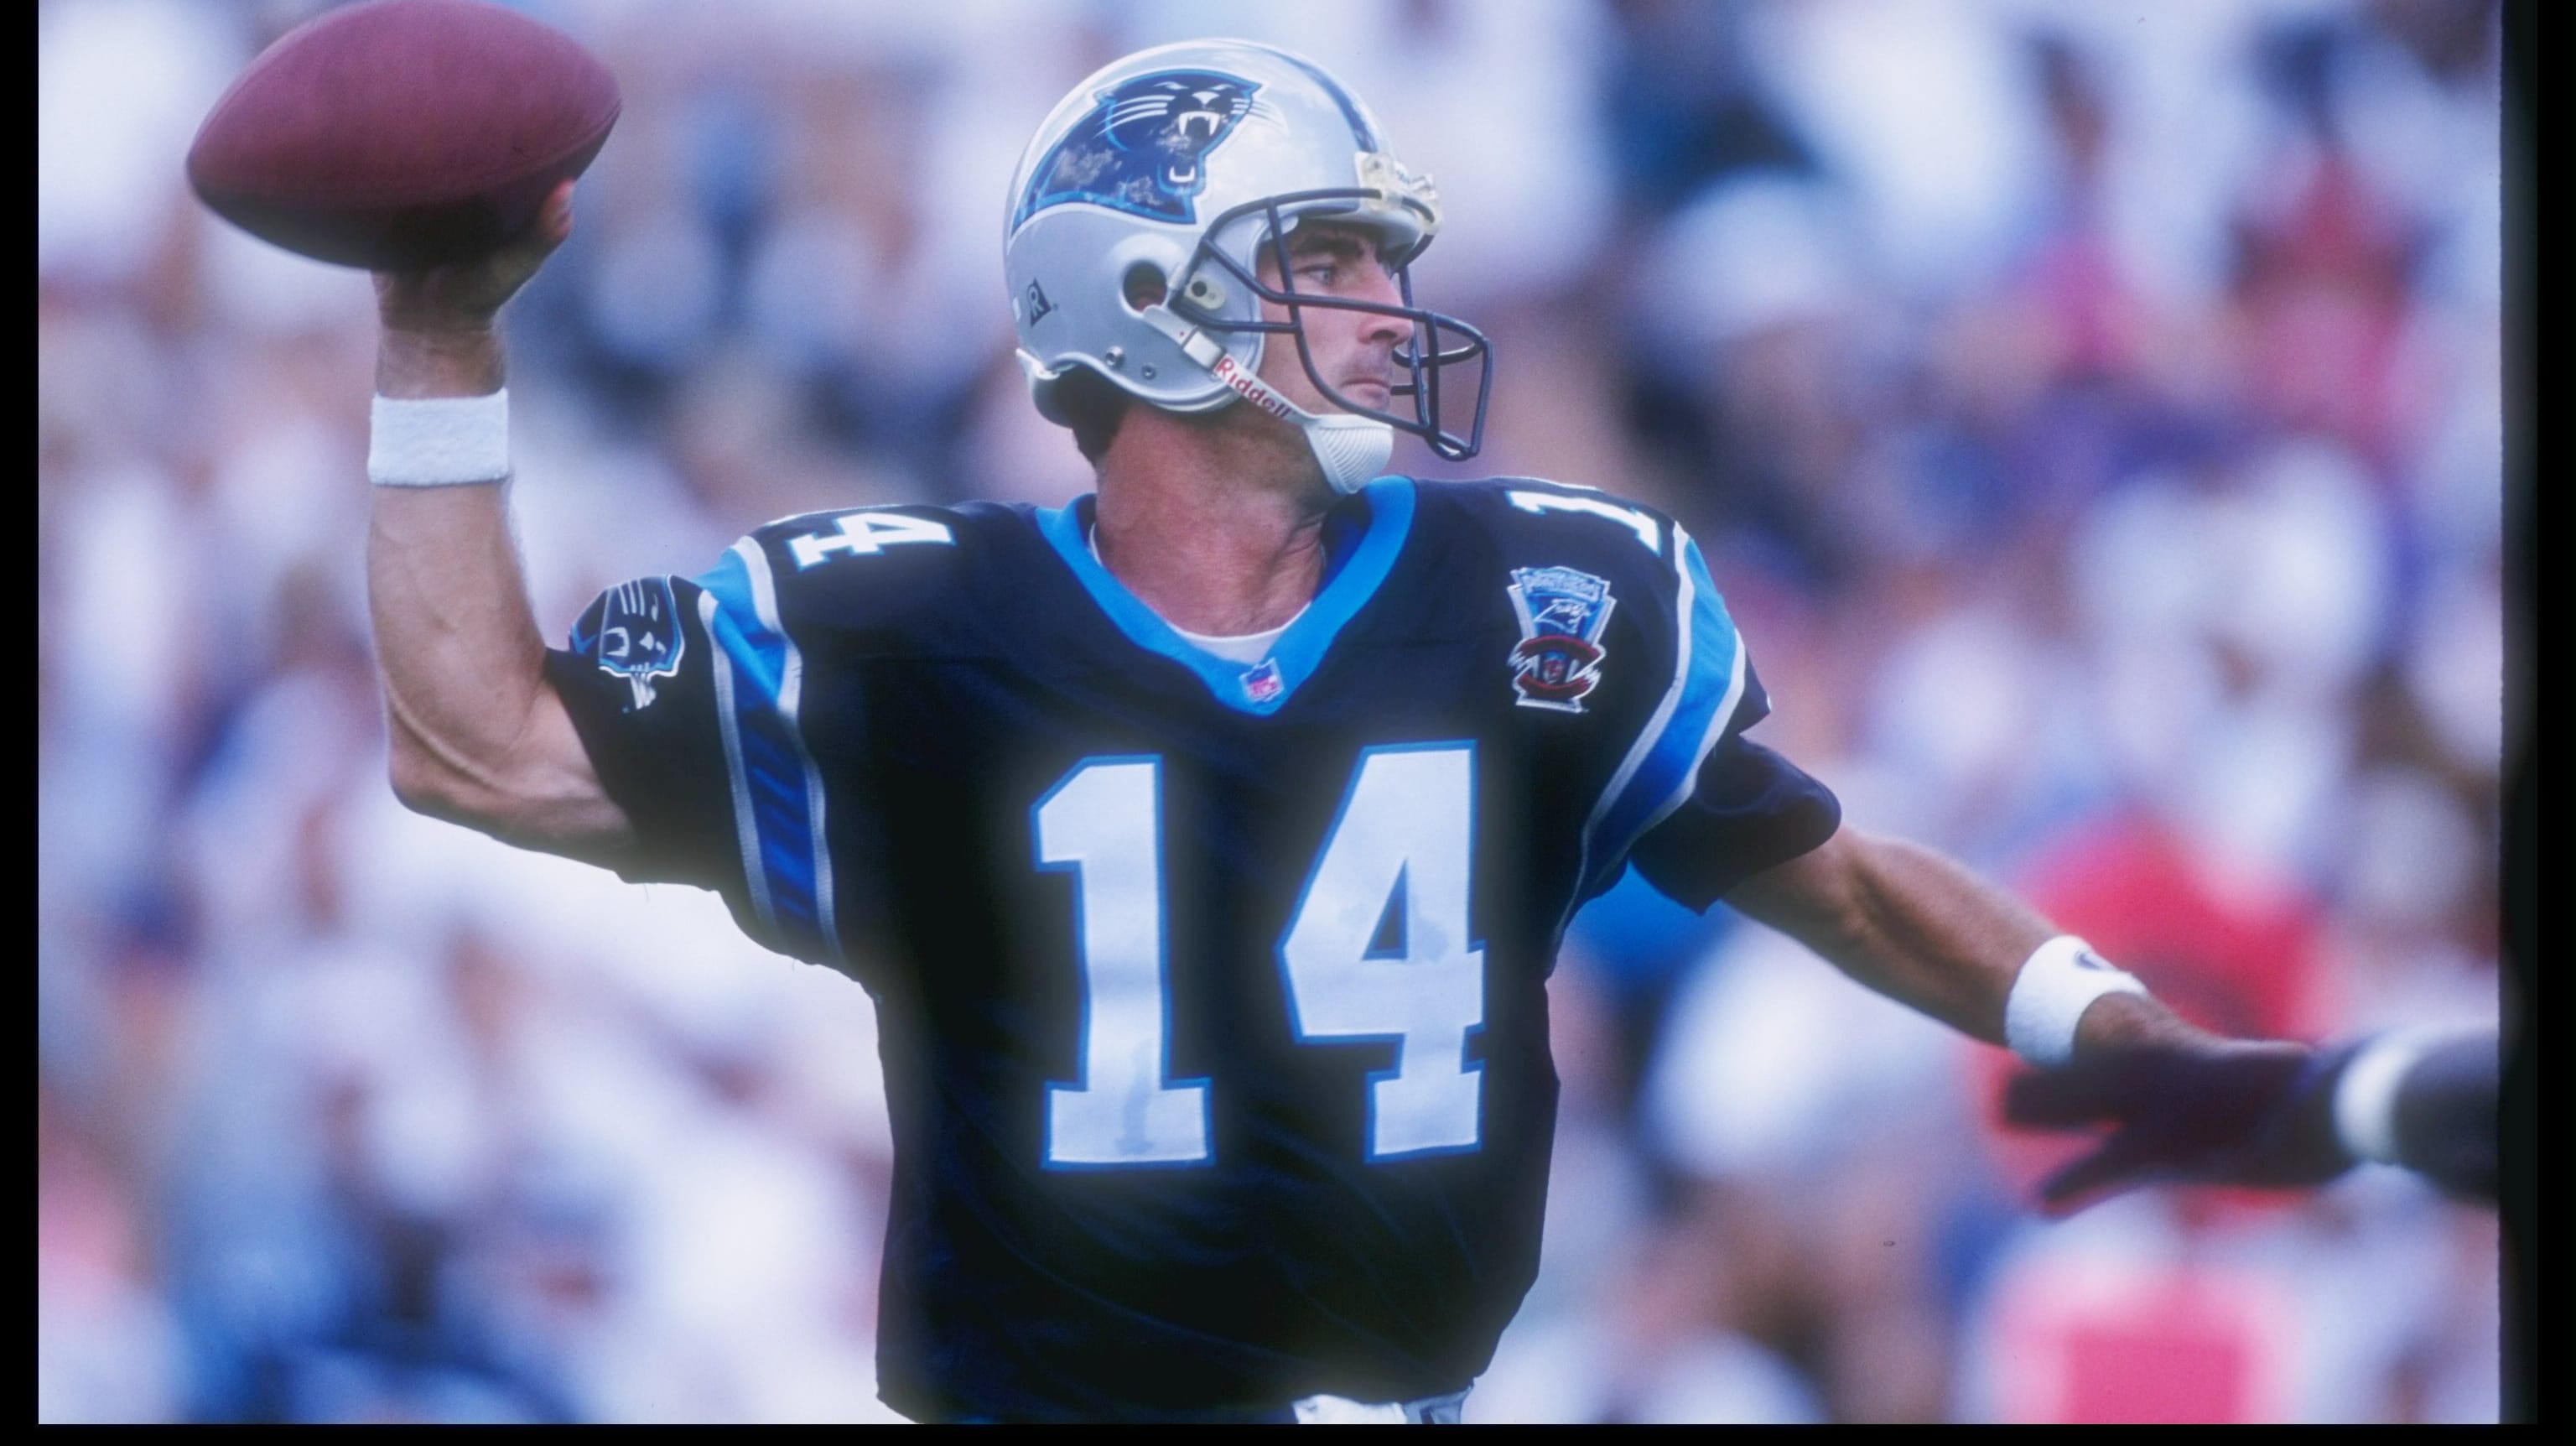 VIDEO: Remembering the First Touchdown in Panthers Franchise History